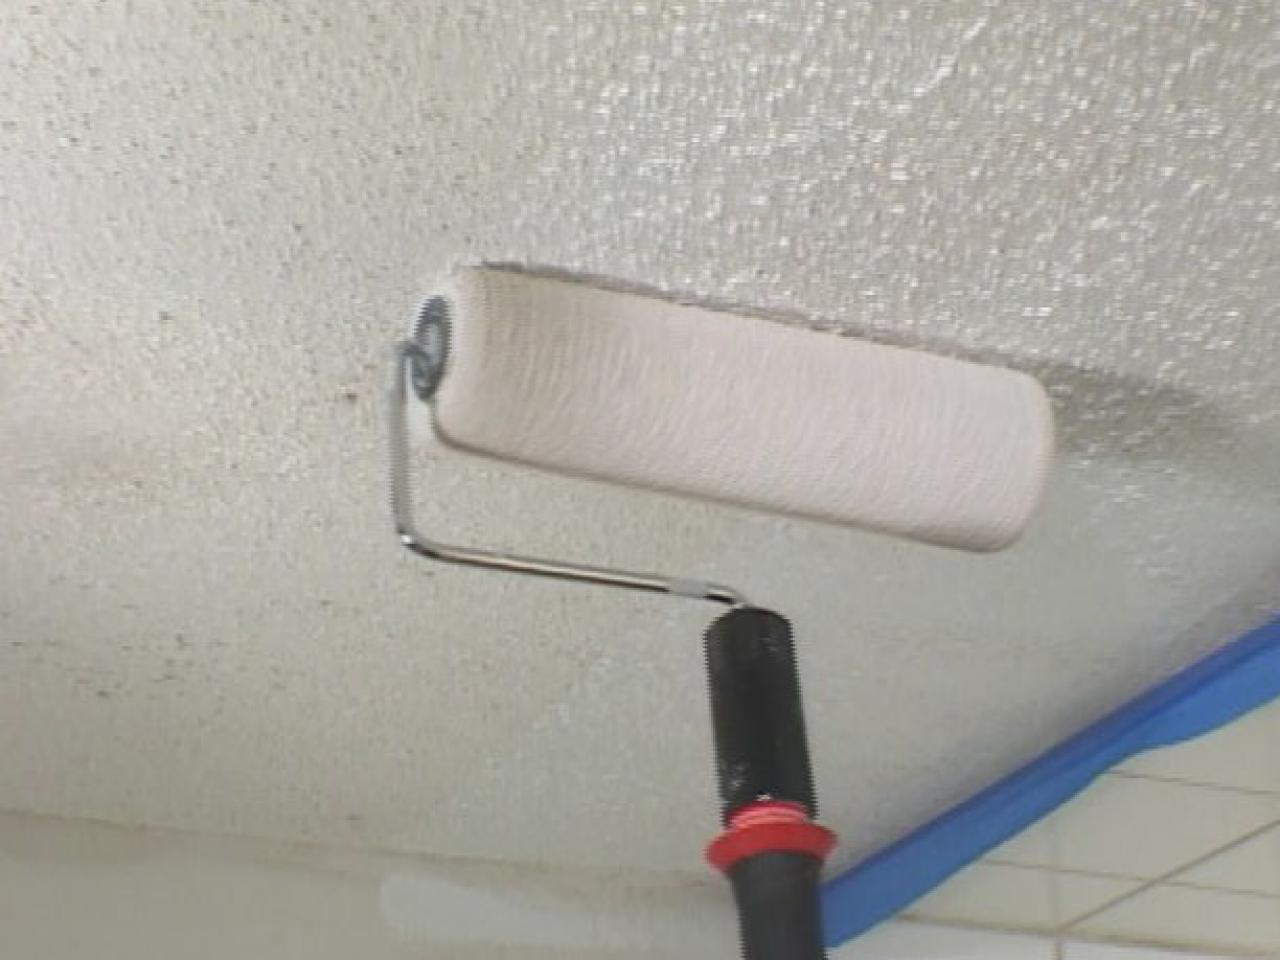 http://www.diynetwork.com/how-to/rooms-and-spaces/walls-and-ceilings/painting-over-a-popcorn-ceiling